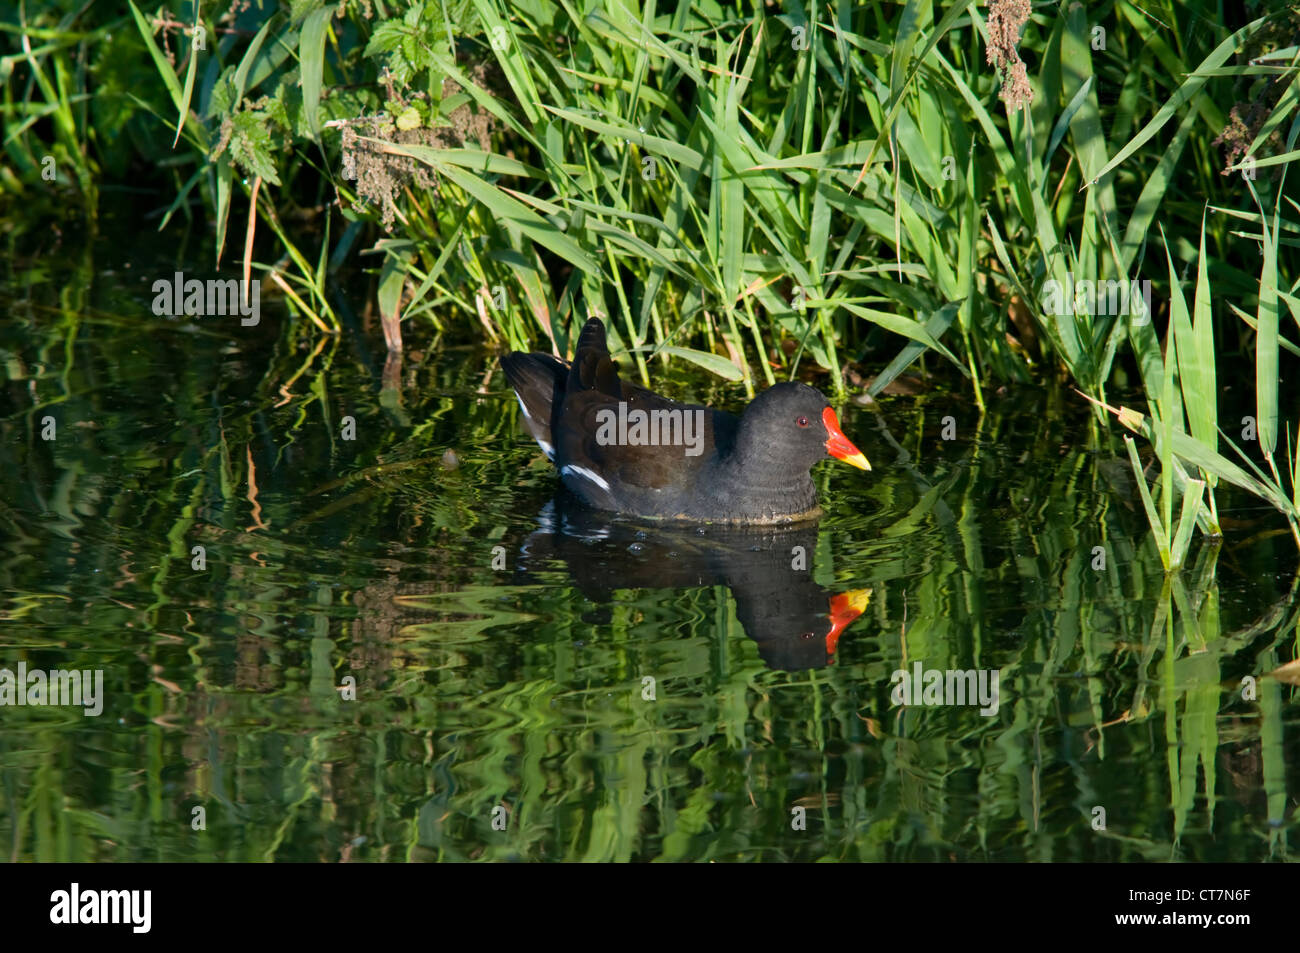 A moorhen glides along the edge of the rushes in the morning sun, shown reflected in the water. Stock Photo